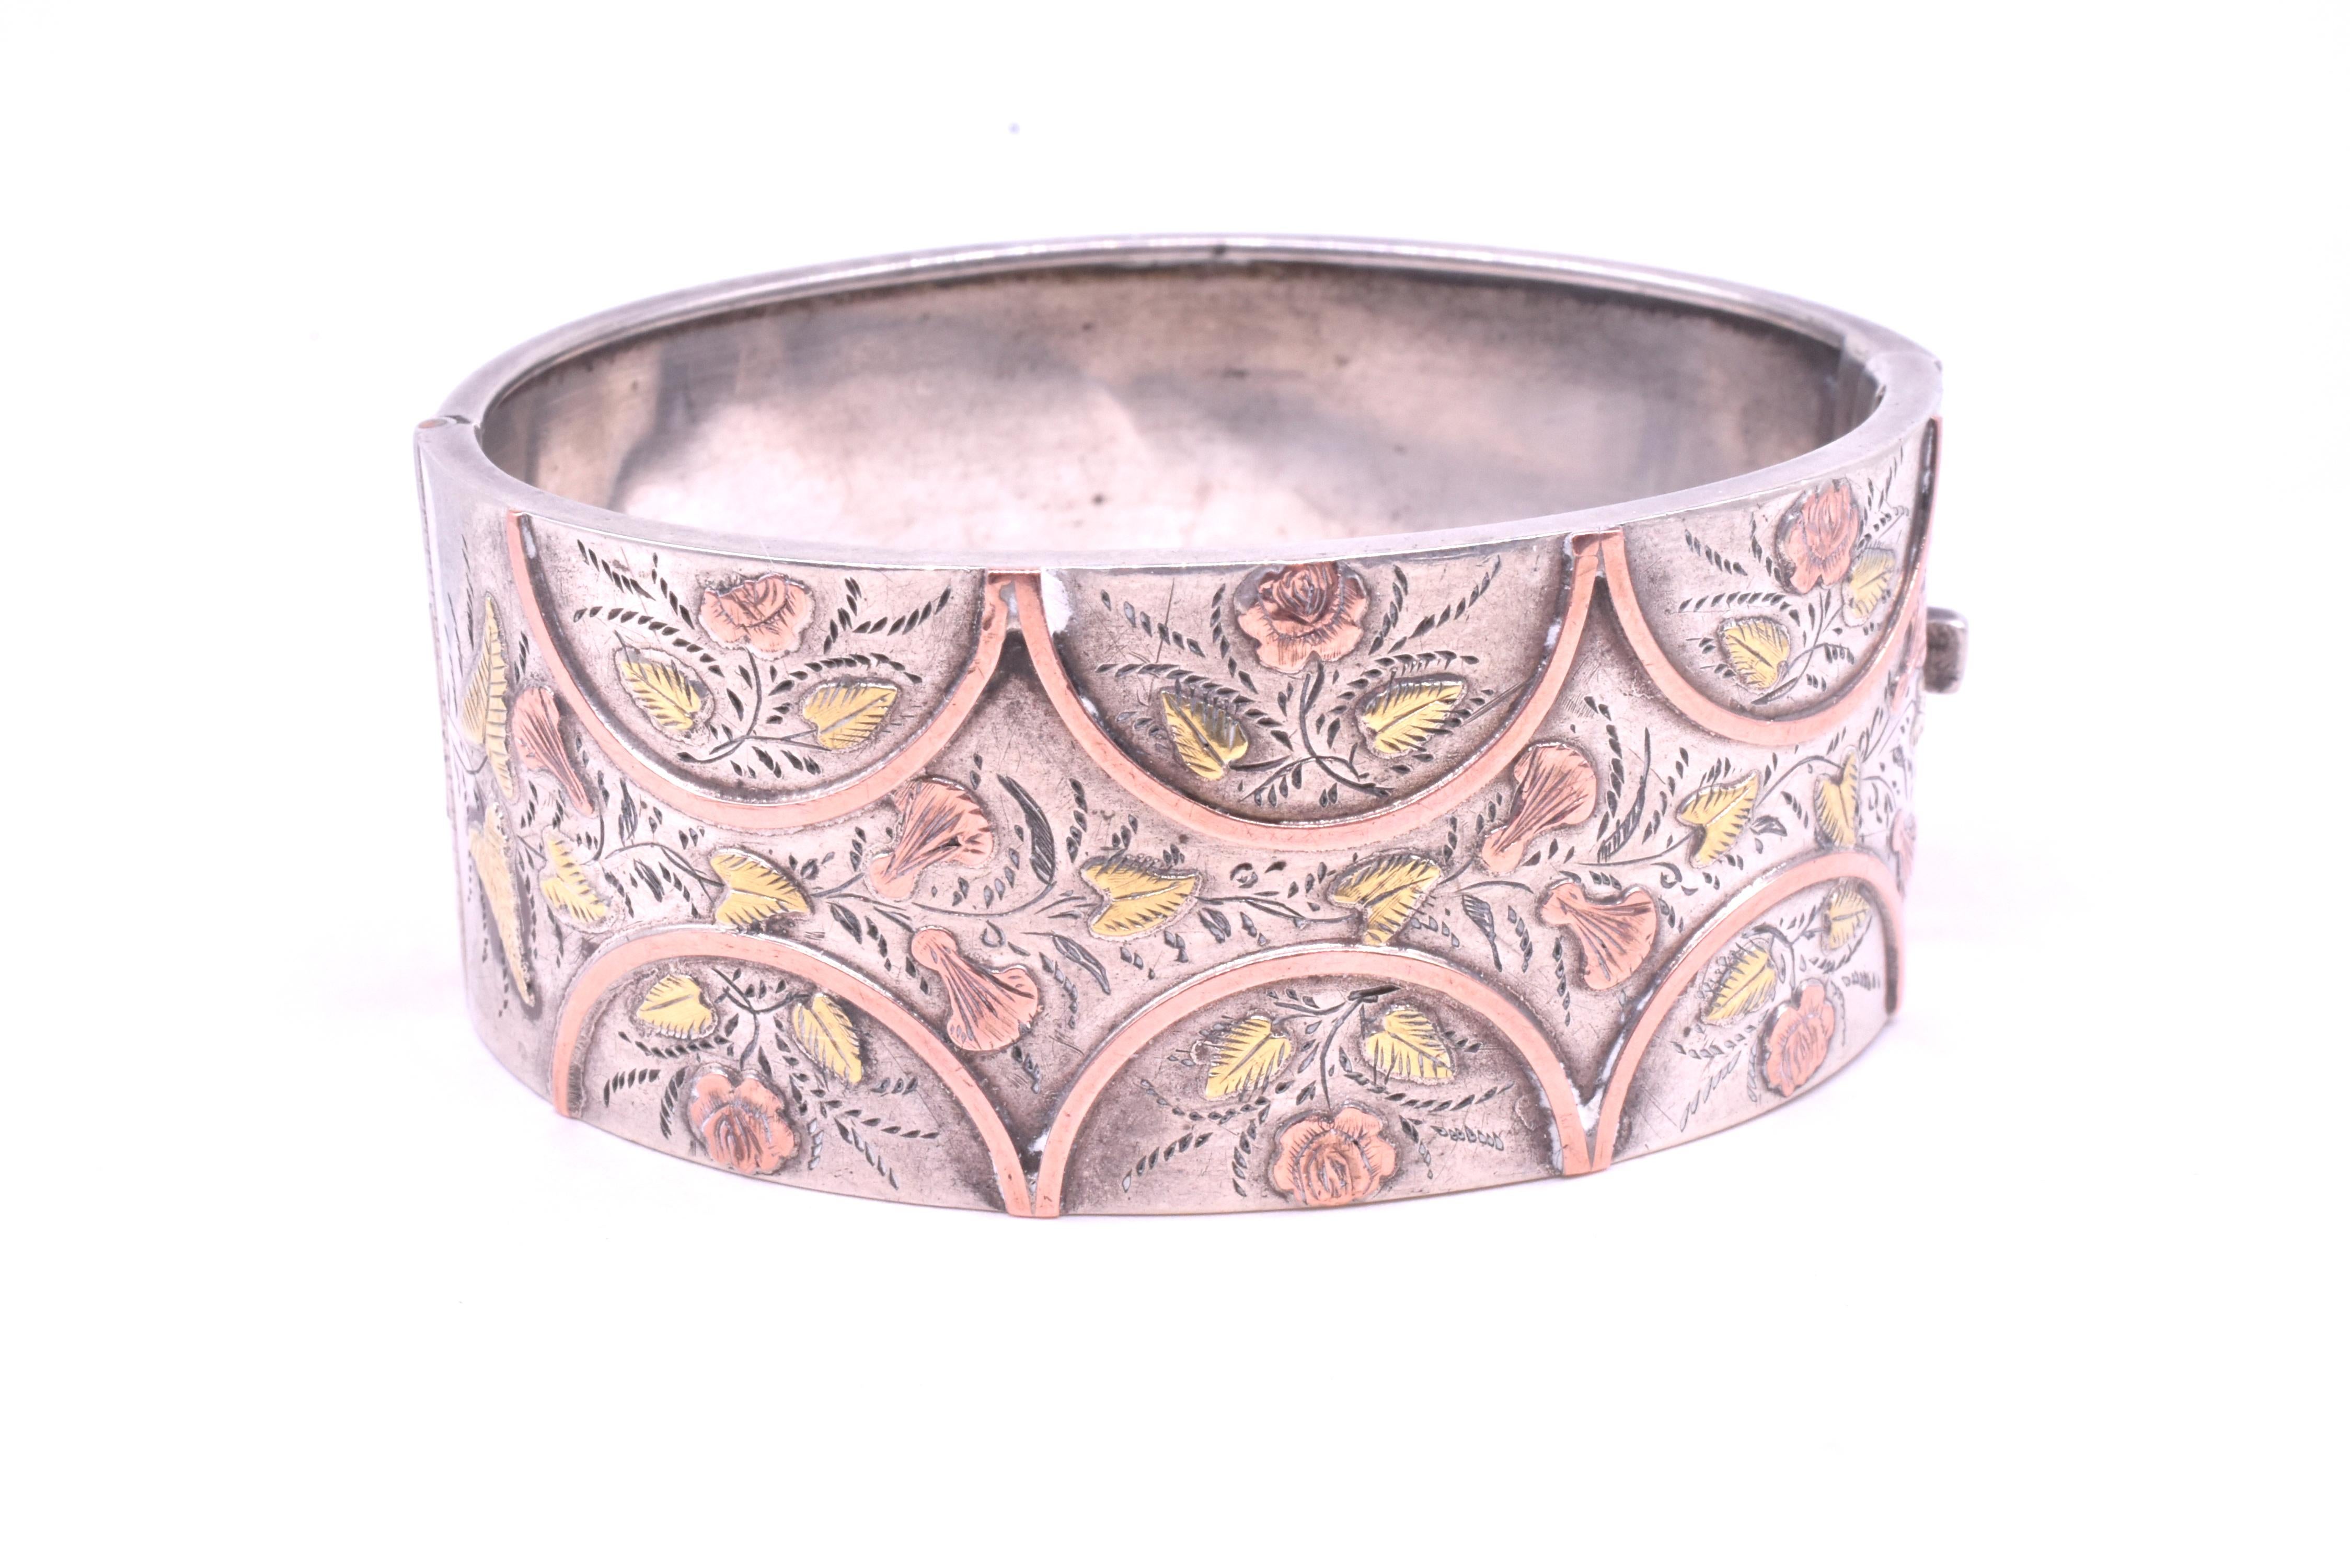 Wonderful silver cuff with two color gold leaves, roses and lilies accented with gold arches. Silver cuffs like this one were made to appeal to all classes of society, including the 